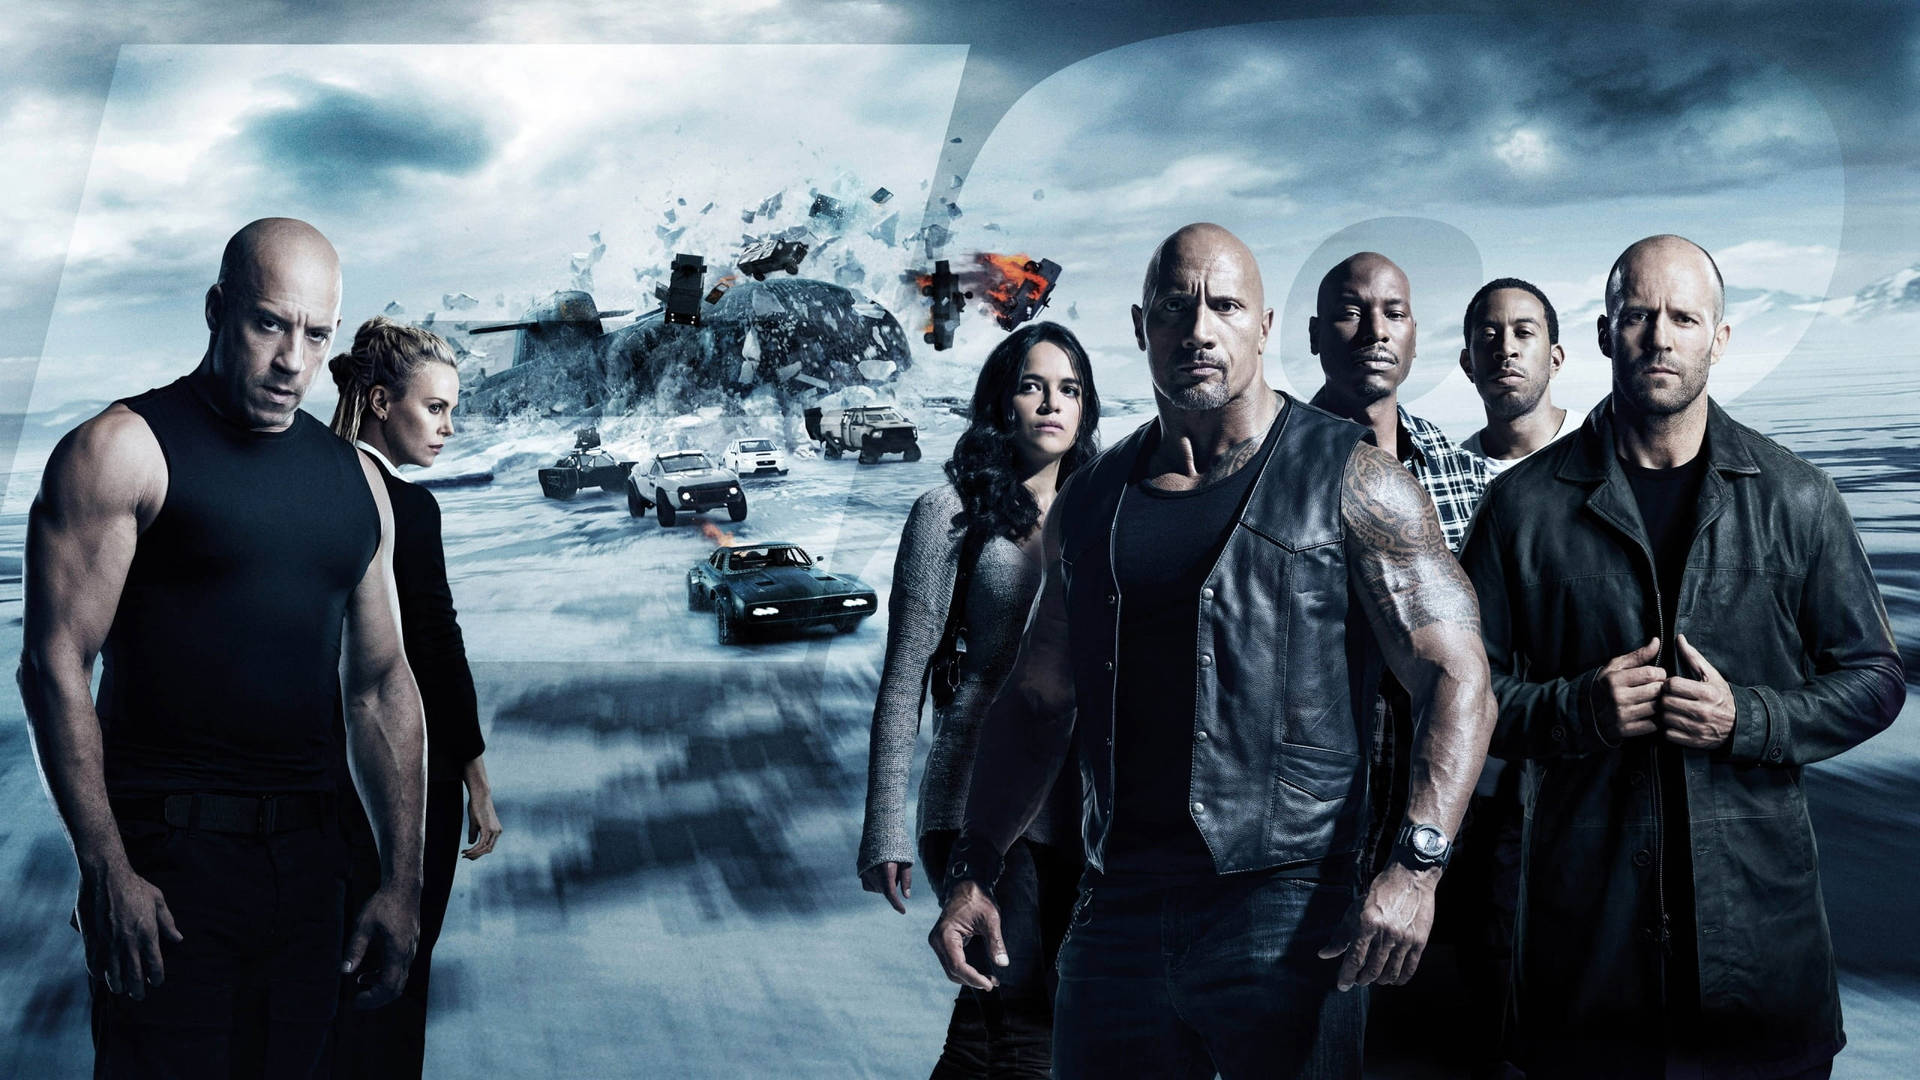 Free Fast And Furious Cars Wallpaper Downloads, [100+] Fast And Furious  Cars Wallpapers for FREE 